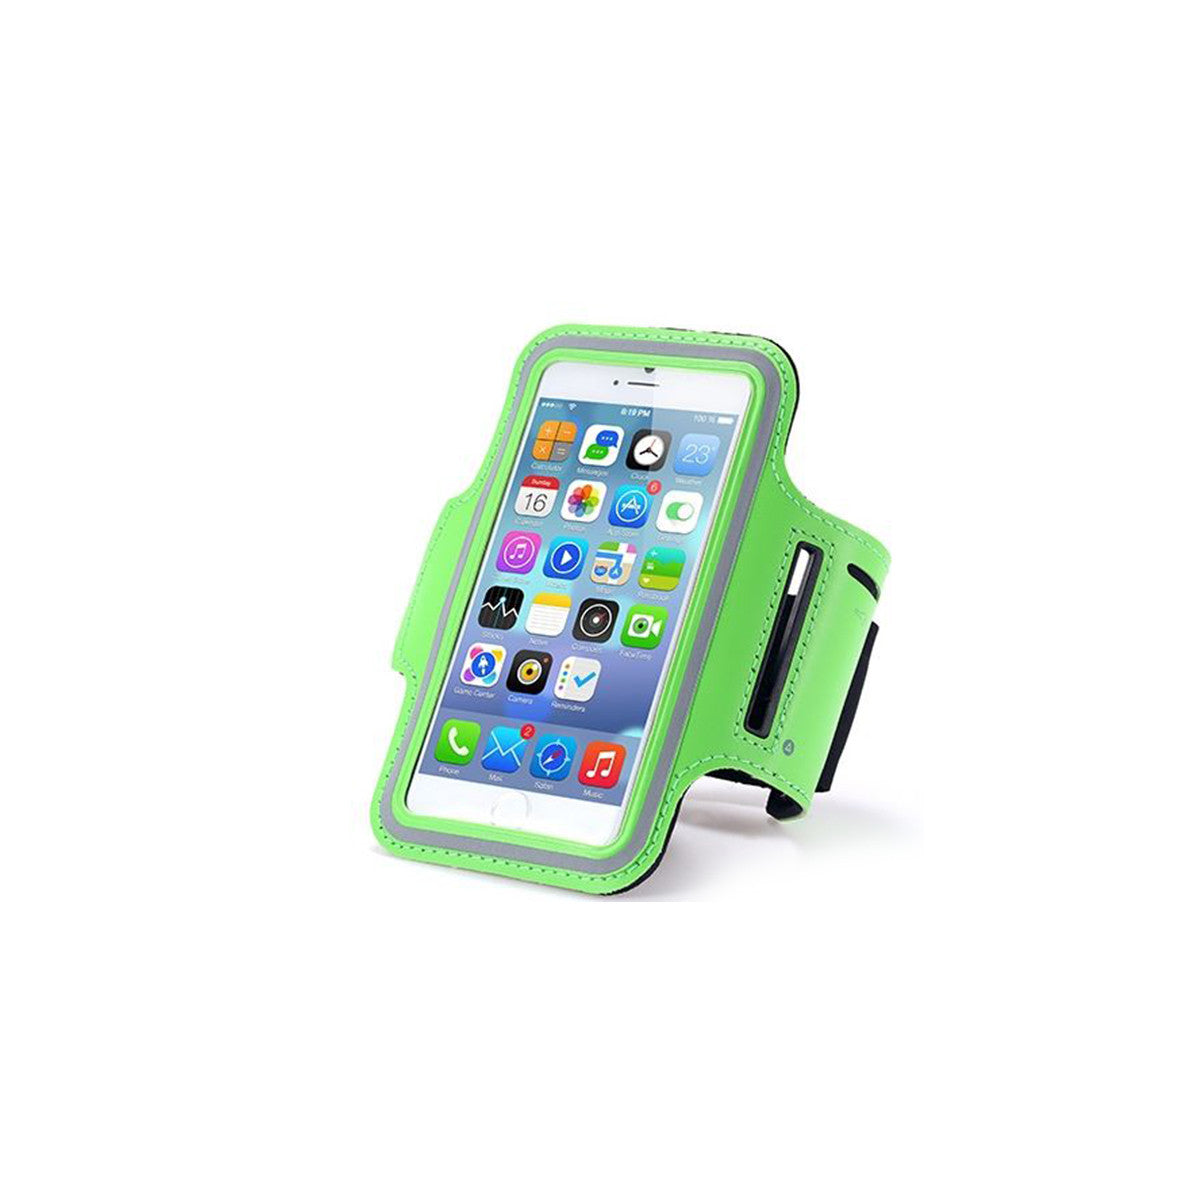 Gym Running Armband For Apple iPhone 5 6 7 & Plus iPhone 5/5S/5C/SE Green 